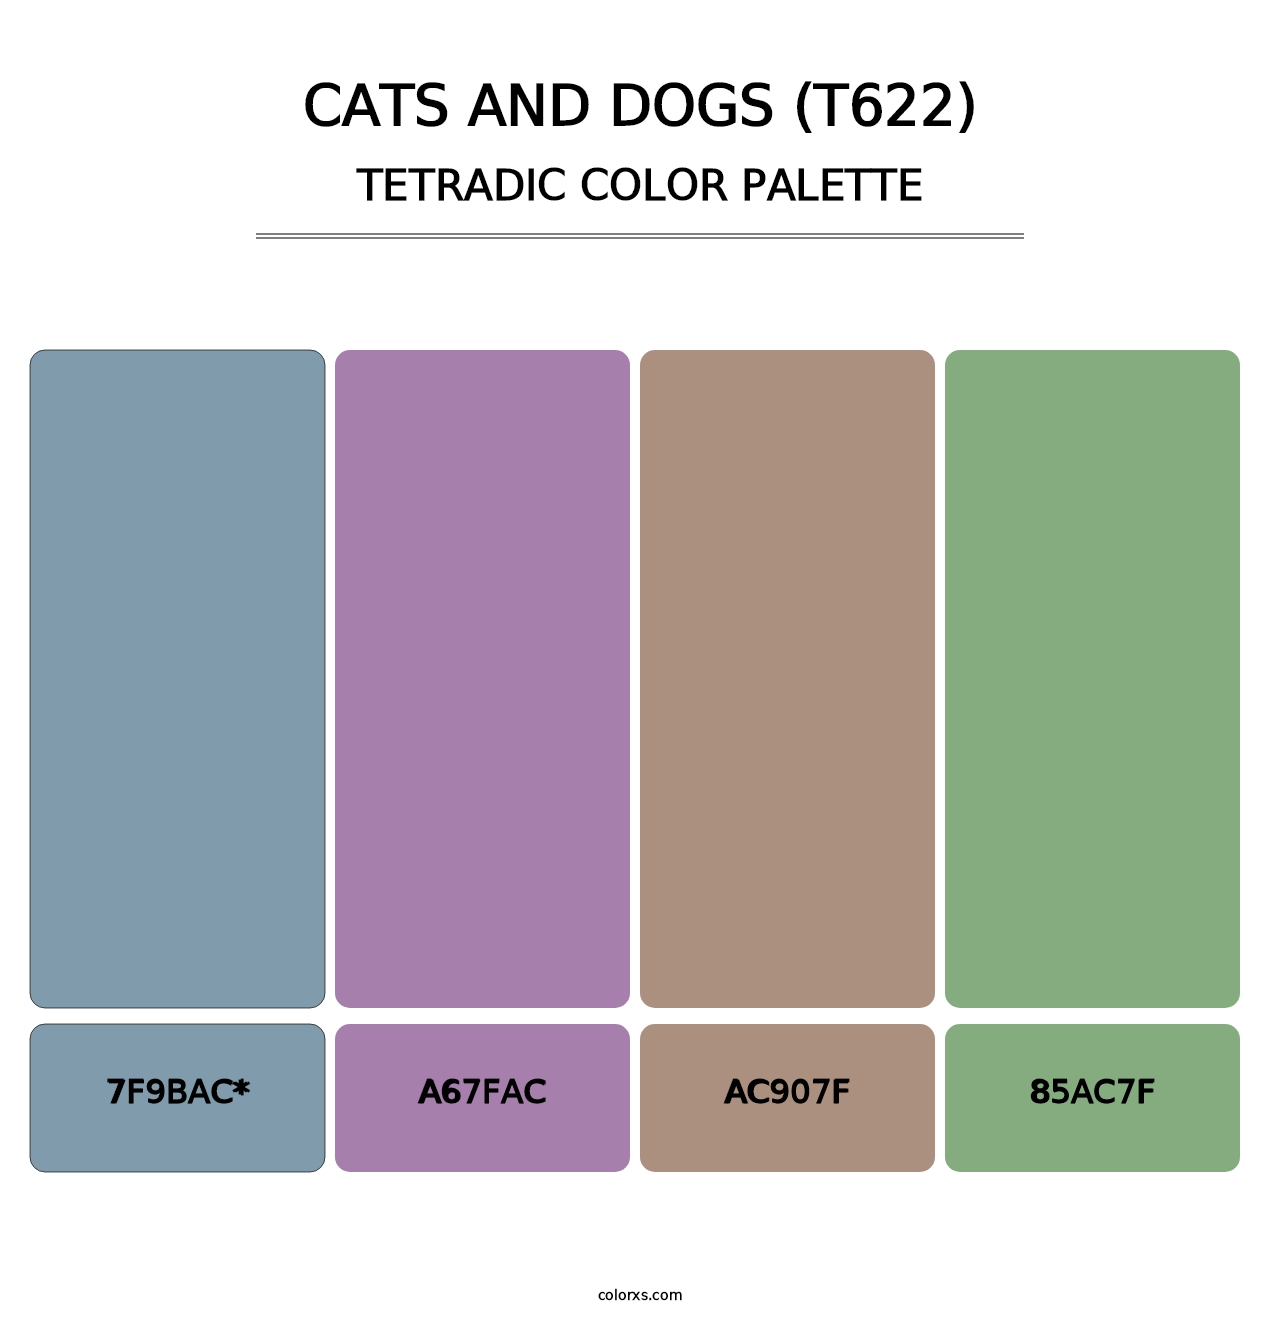 Cats and Dogs (T622) - Tetradic Color Palette